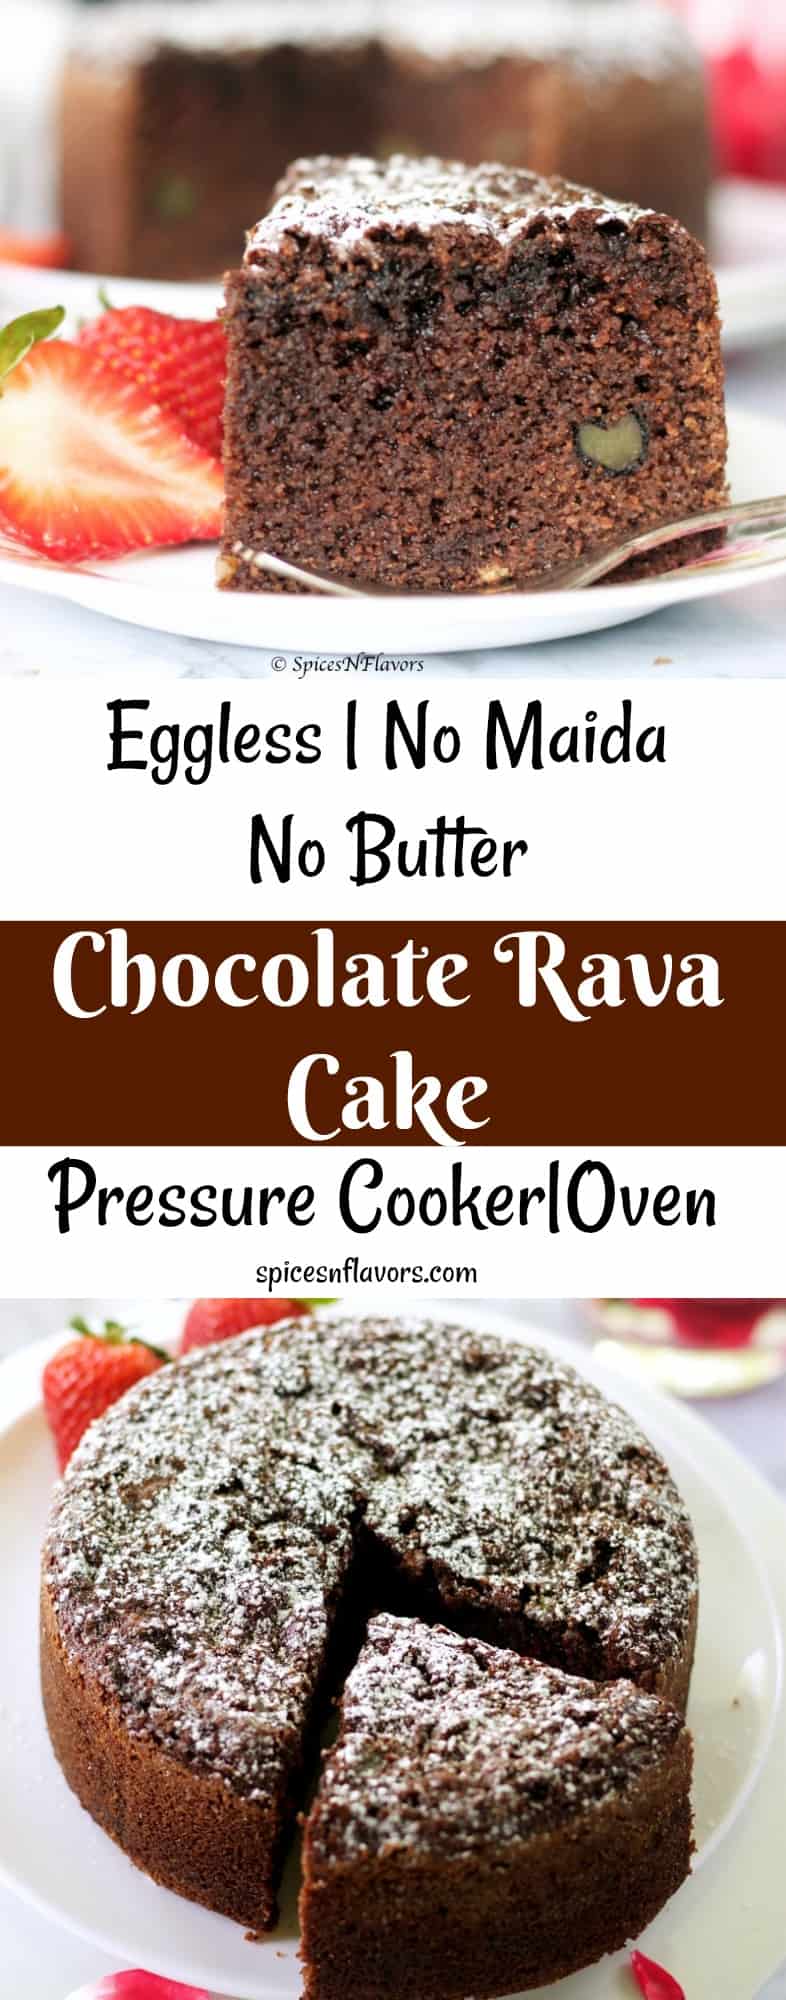 chocolate rava cake eggless cake butter less maida less cake no all purpose flour cake easy simple how to make cake in a cooker cooker cake ip cake #cookercake #ipcake #instantpot #cake #ravacake #eggless #nomaida #nobutter